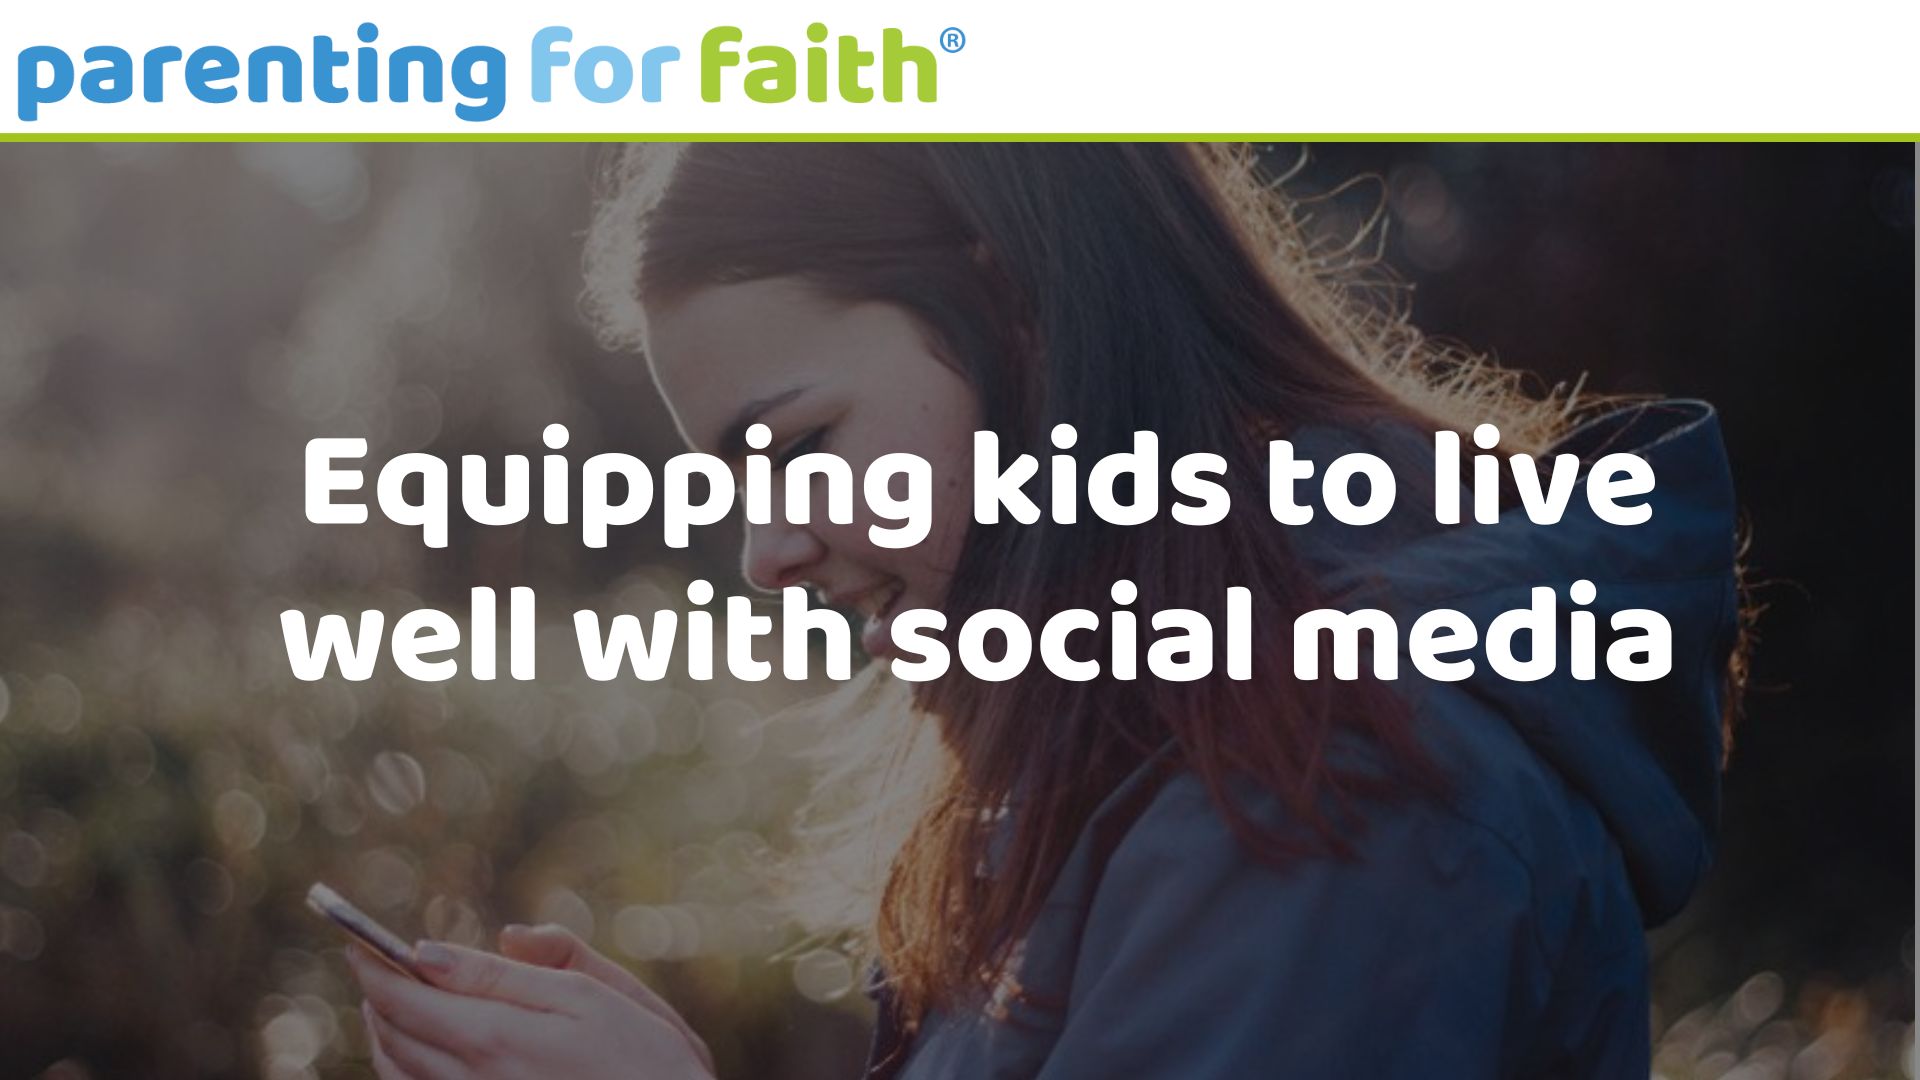 Equipping kids to live well with social media